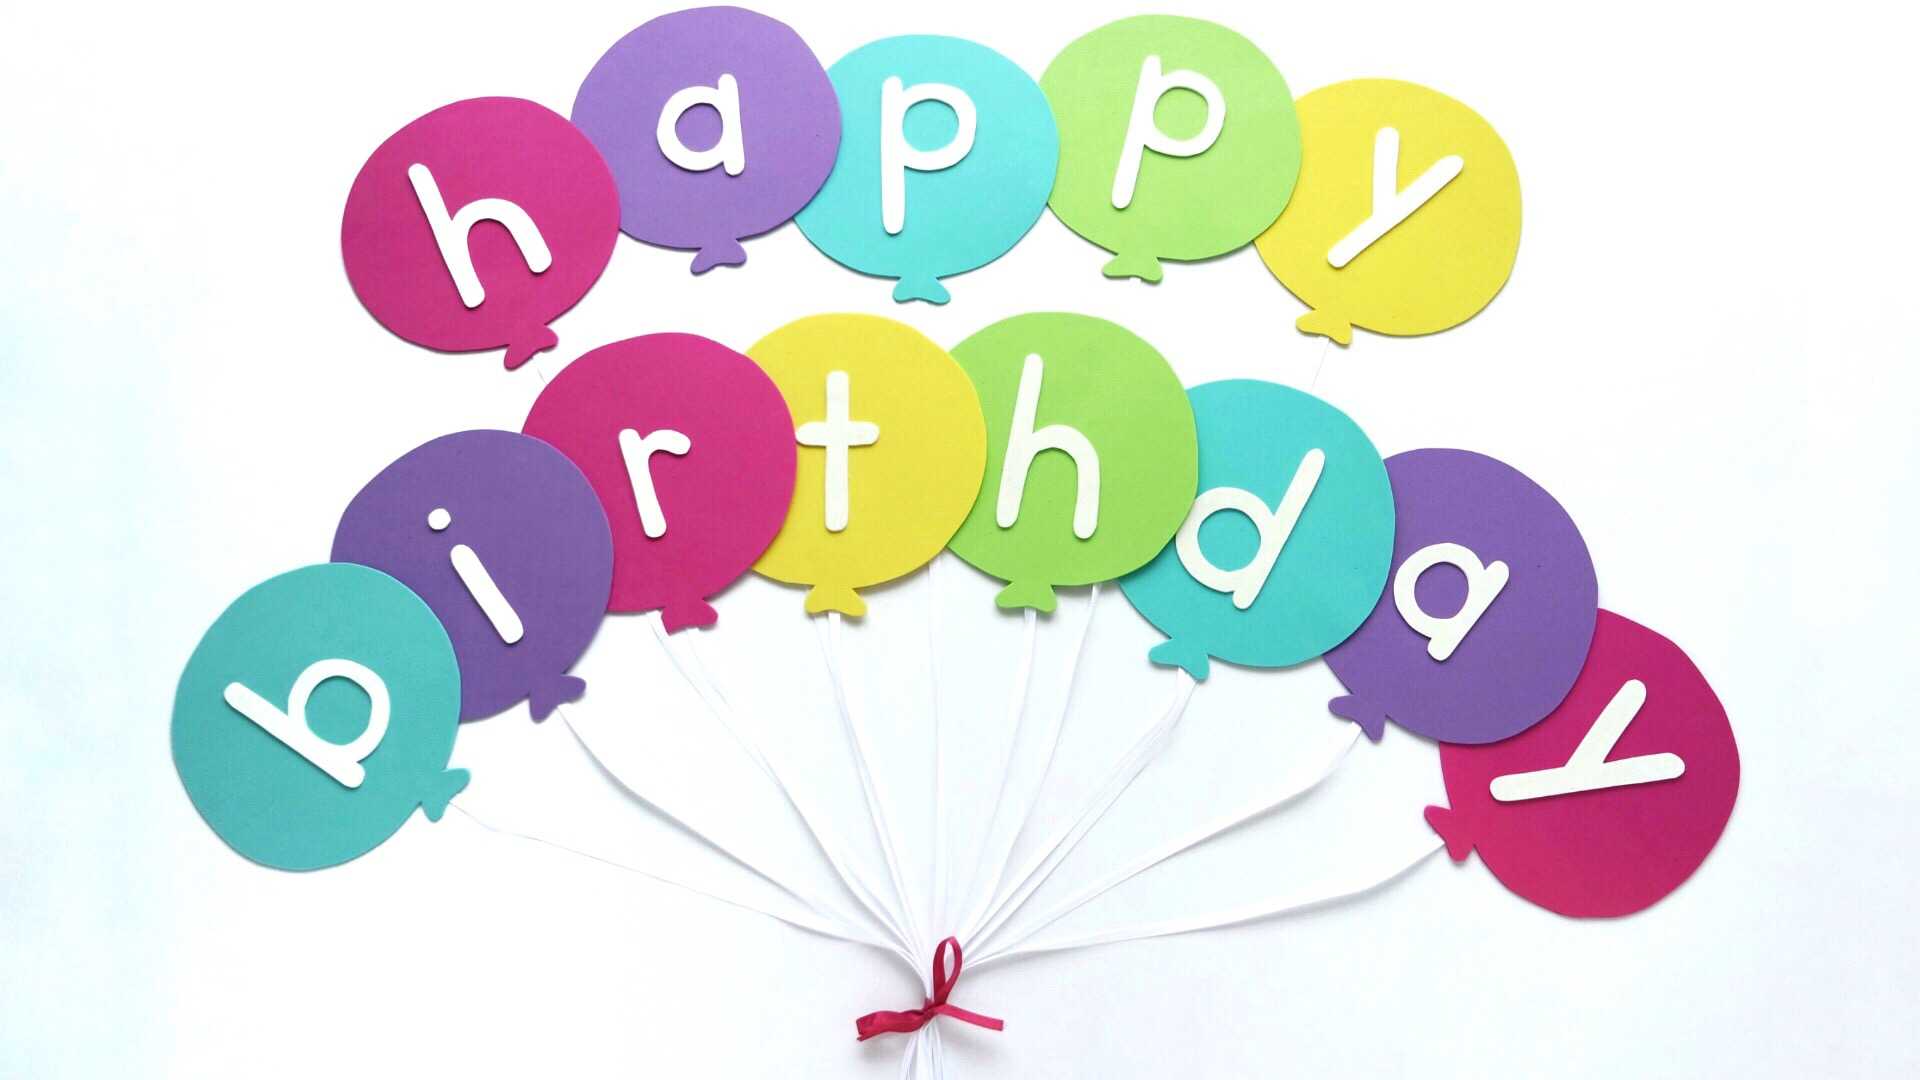 Happy Birthday Banner Diy Template | Balloon Birthday Banner Intended For Free Printable Happy Birthday Banner Templates